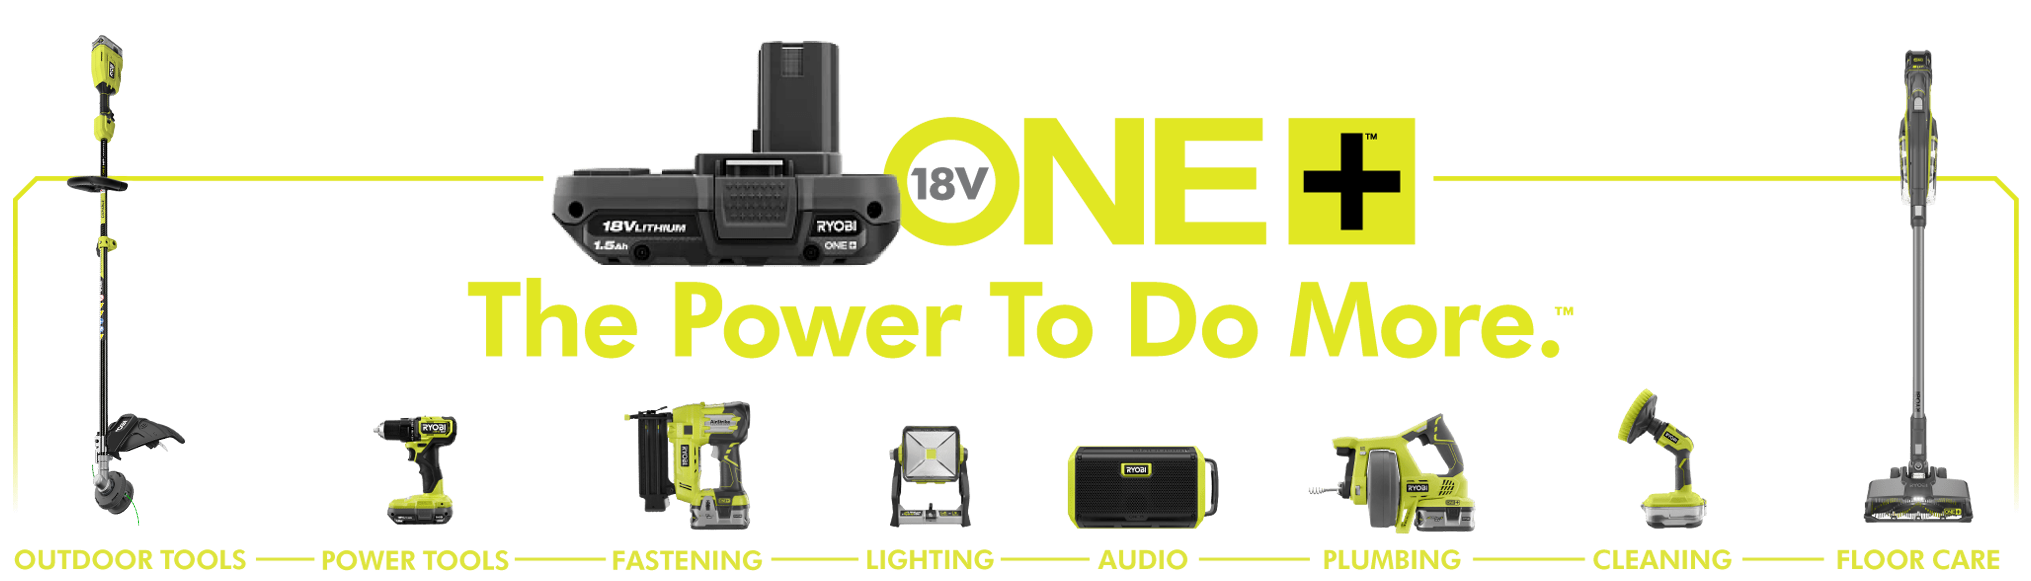 ONE+: The Power To Do More.